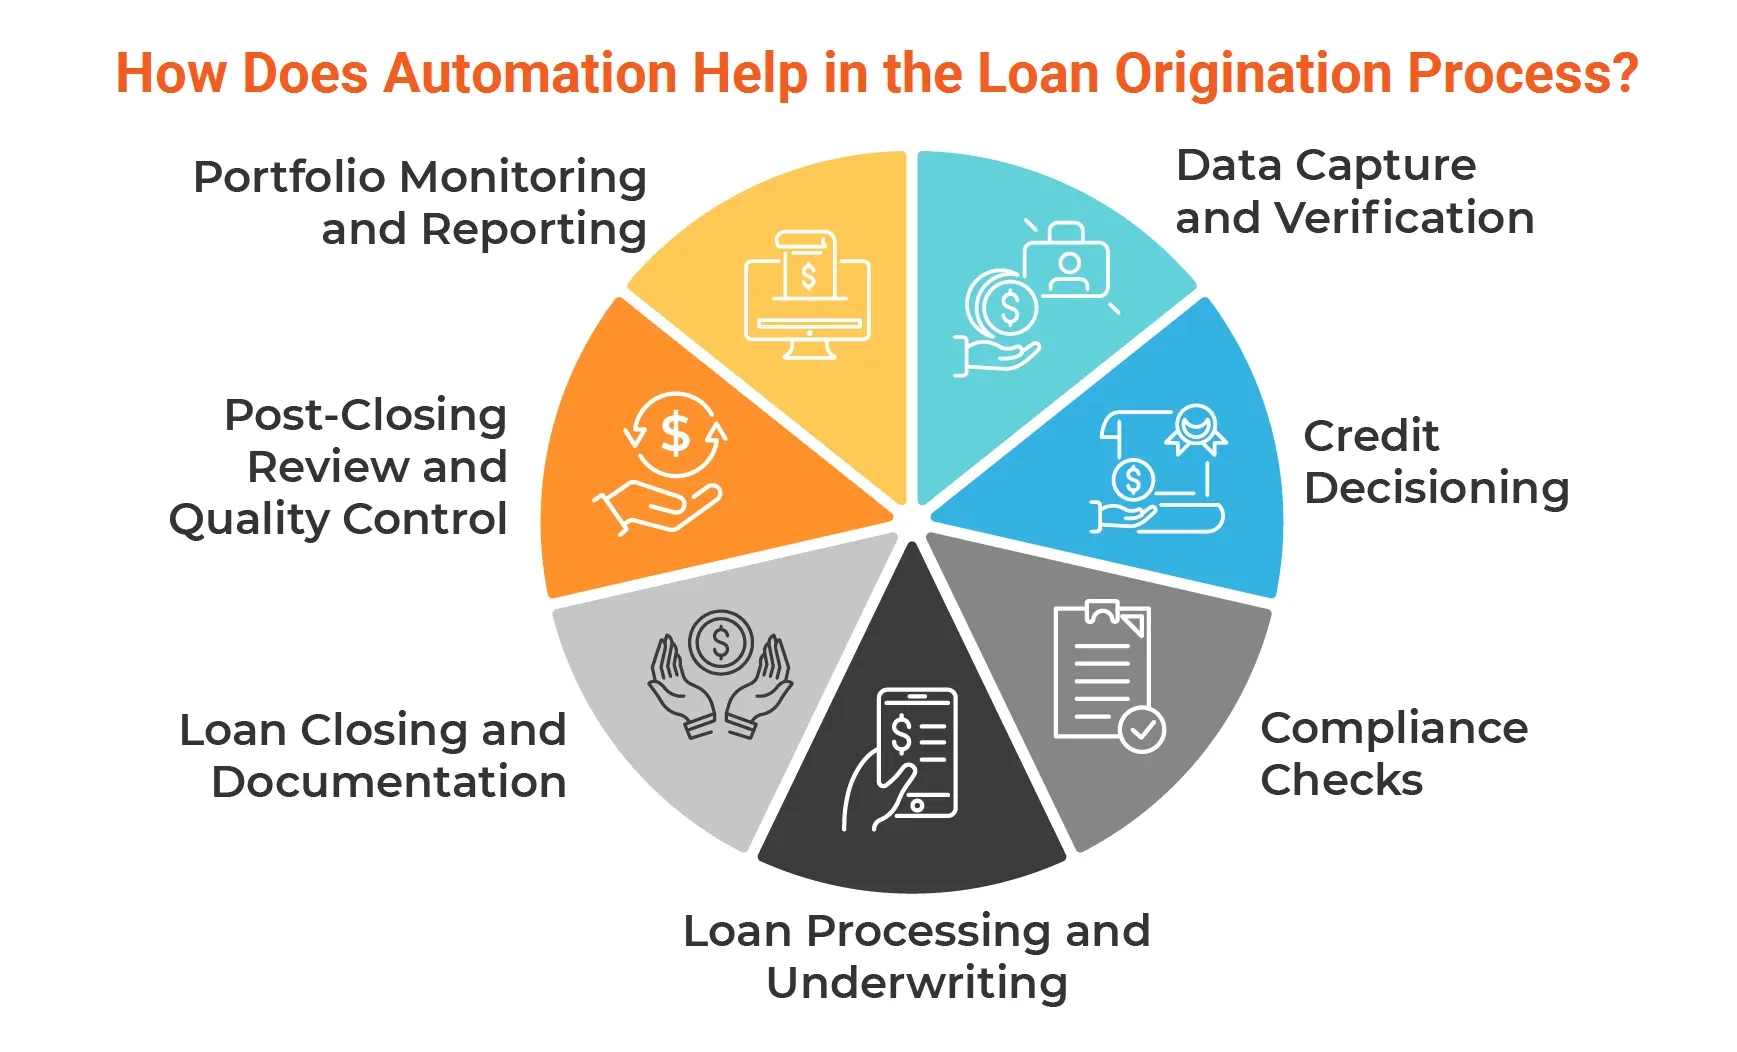 How Does Automation Help in the Loan Origination Process?